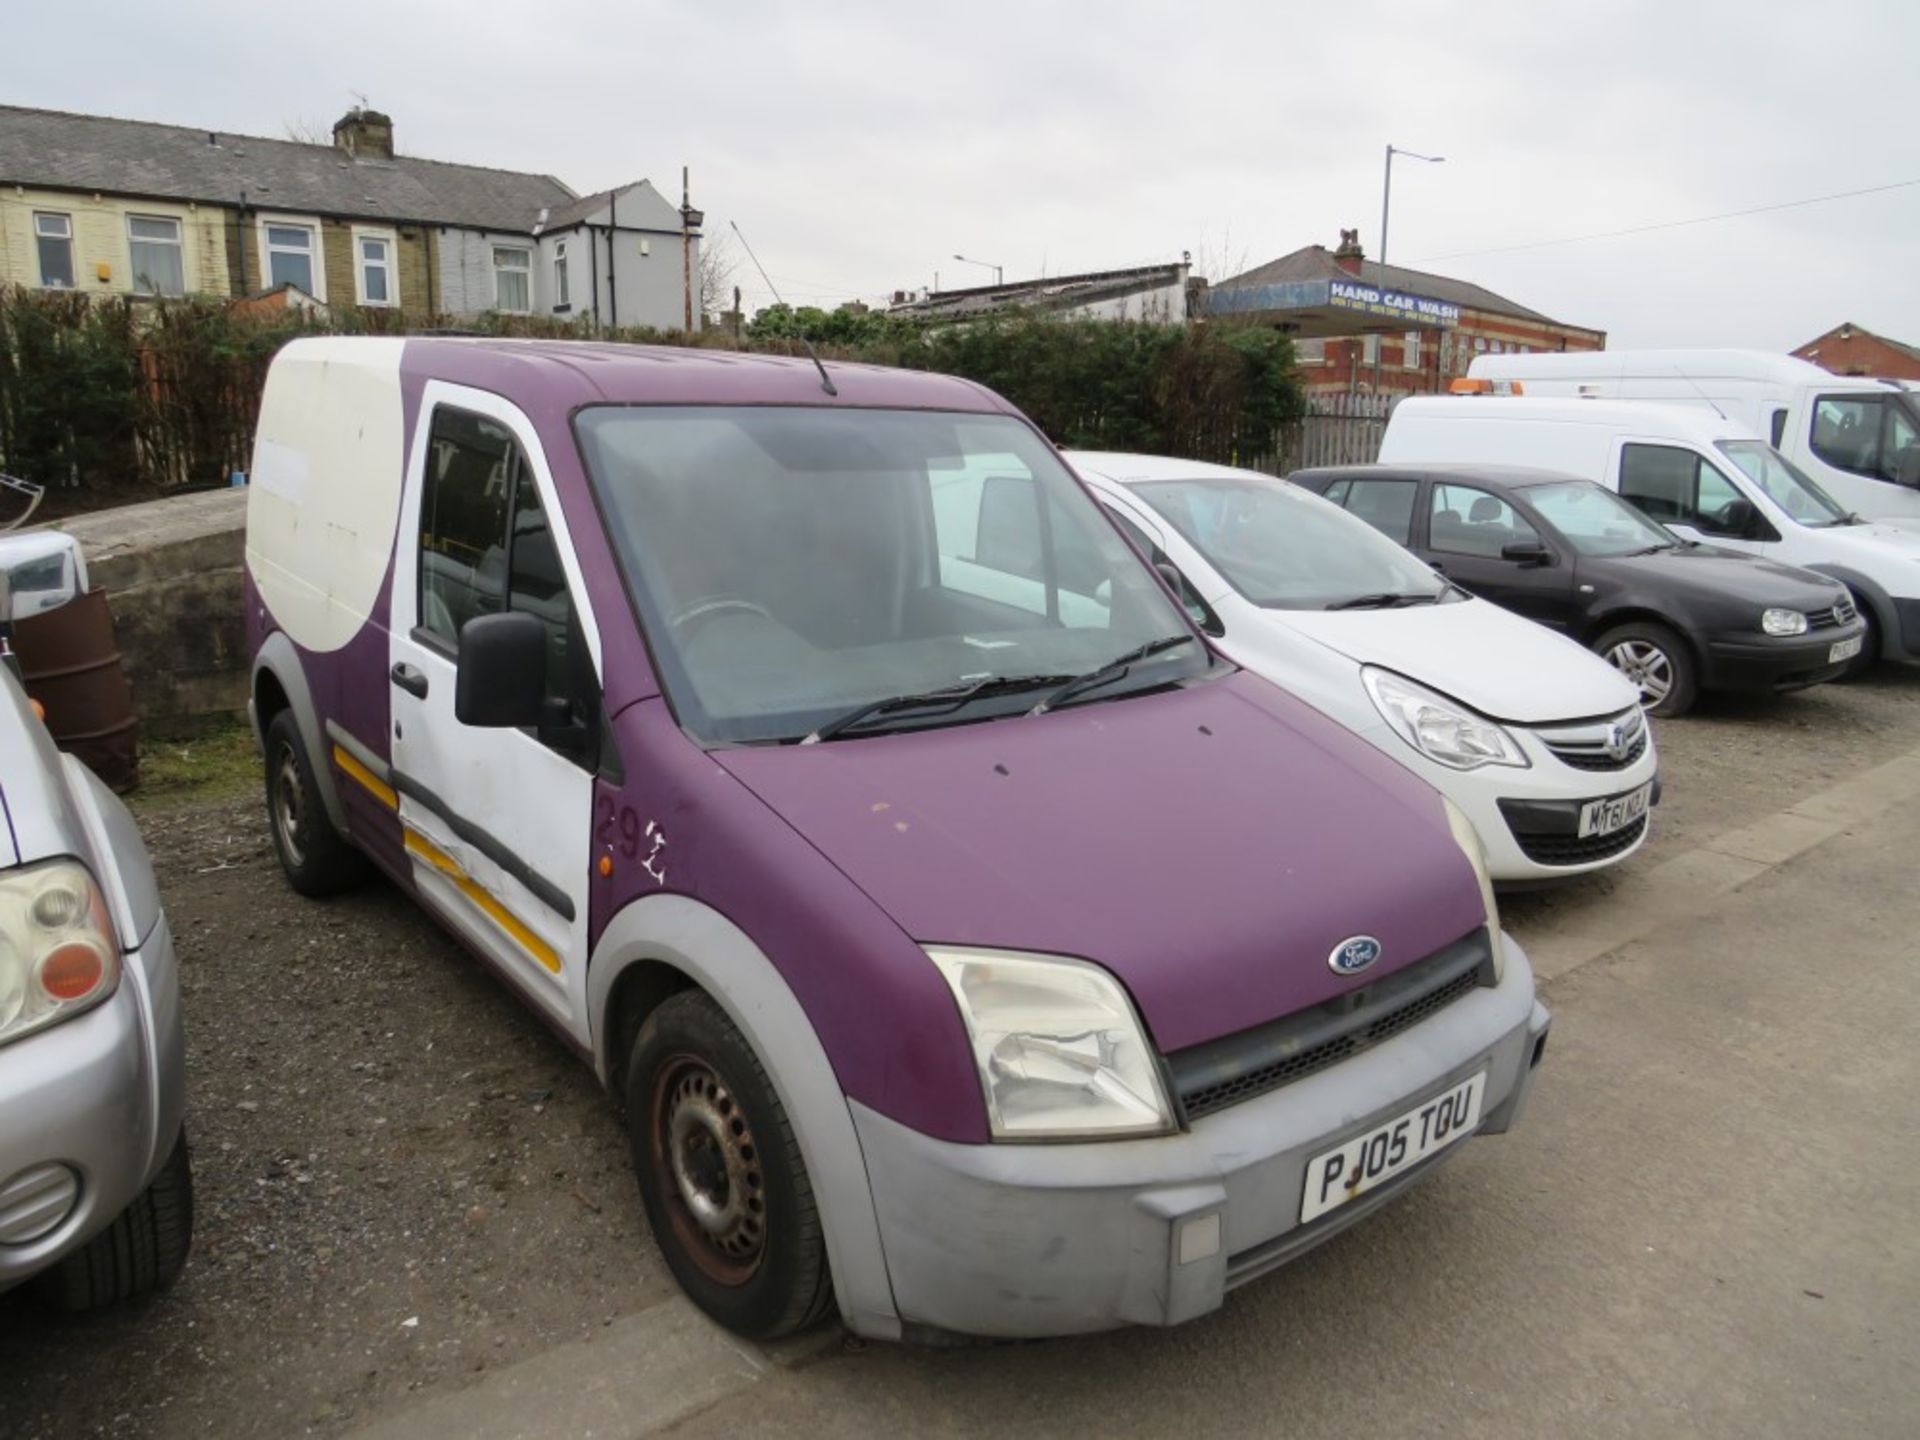 05 reg FORD TRANSIT CONNECT L 200 TD SWB (NON RUNNER) (DIRECT COUNCIL) 1ST REG 05/05, MILEAGE NOT